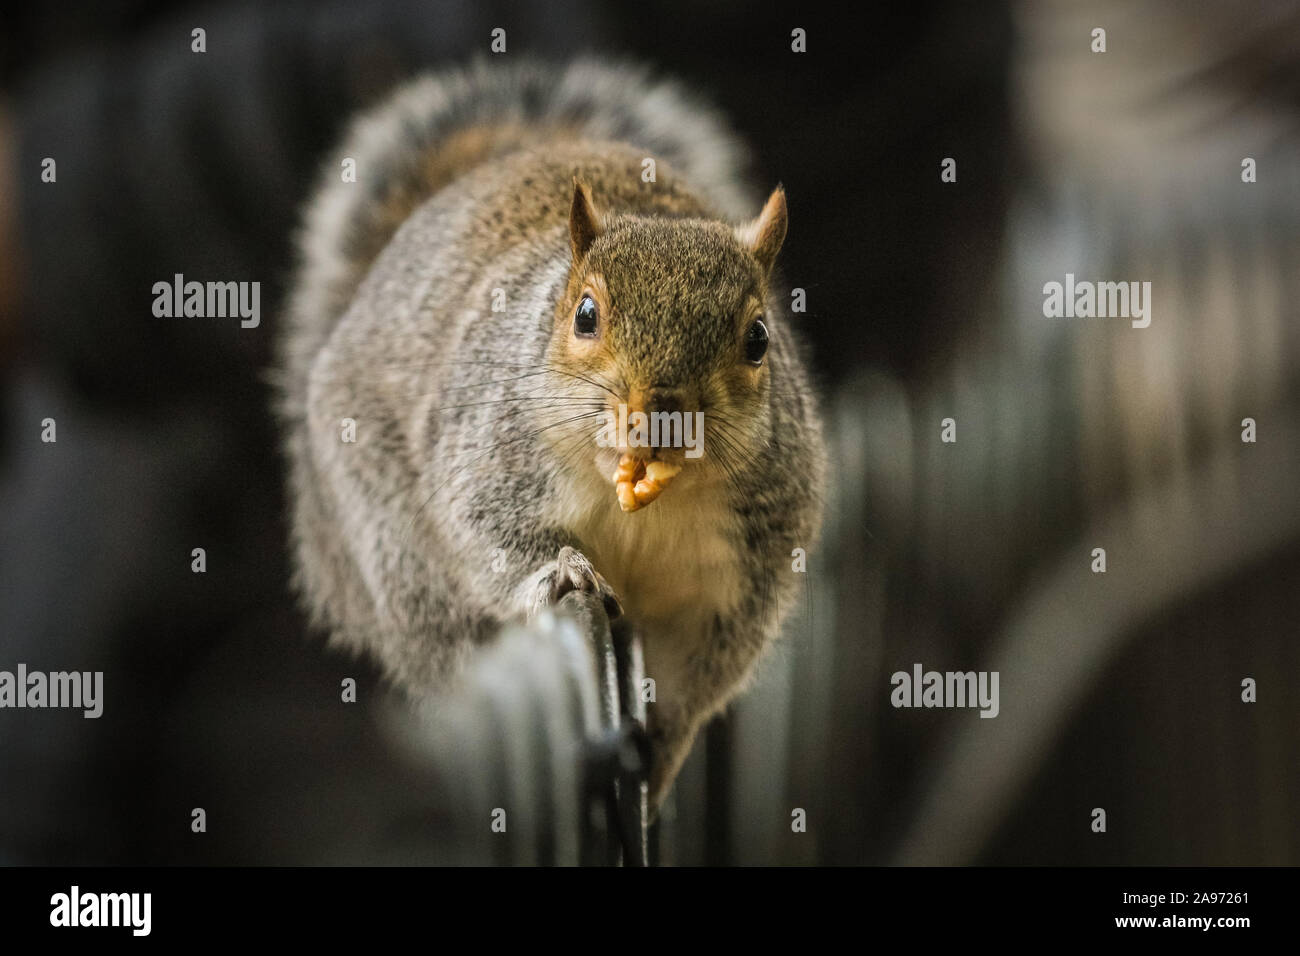 St James's Park, London, UK, 13th November 2019. A squirrel hurries away with its walnut treasure. Squirrels in London's St James's Park in Westminster enjoy the late autumn sunshine, digging for nuts and playing in the colourful fallen leaves. Credit: Imageplotter/Alamy Live News Stock Photo